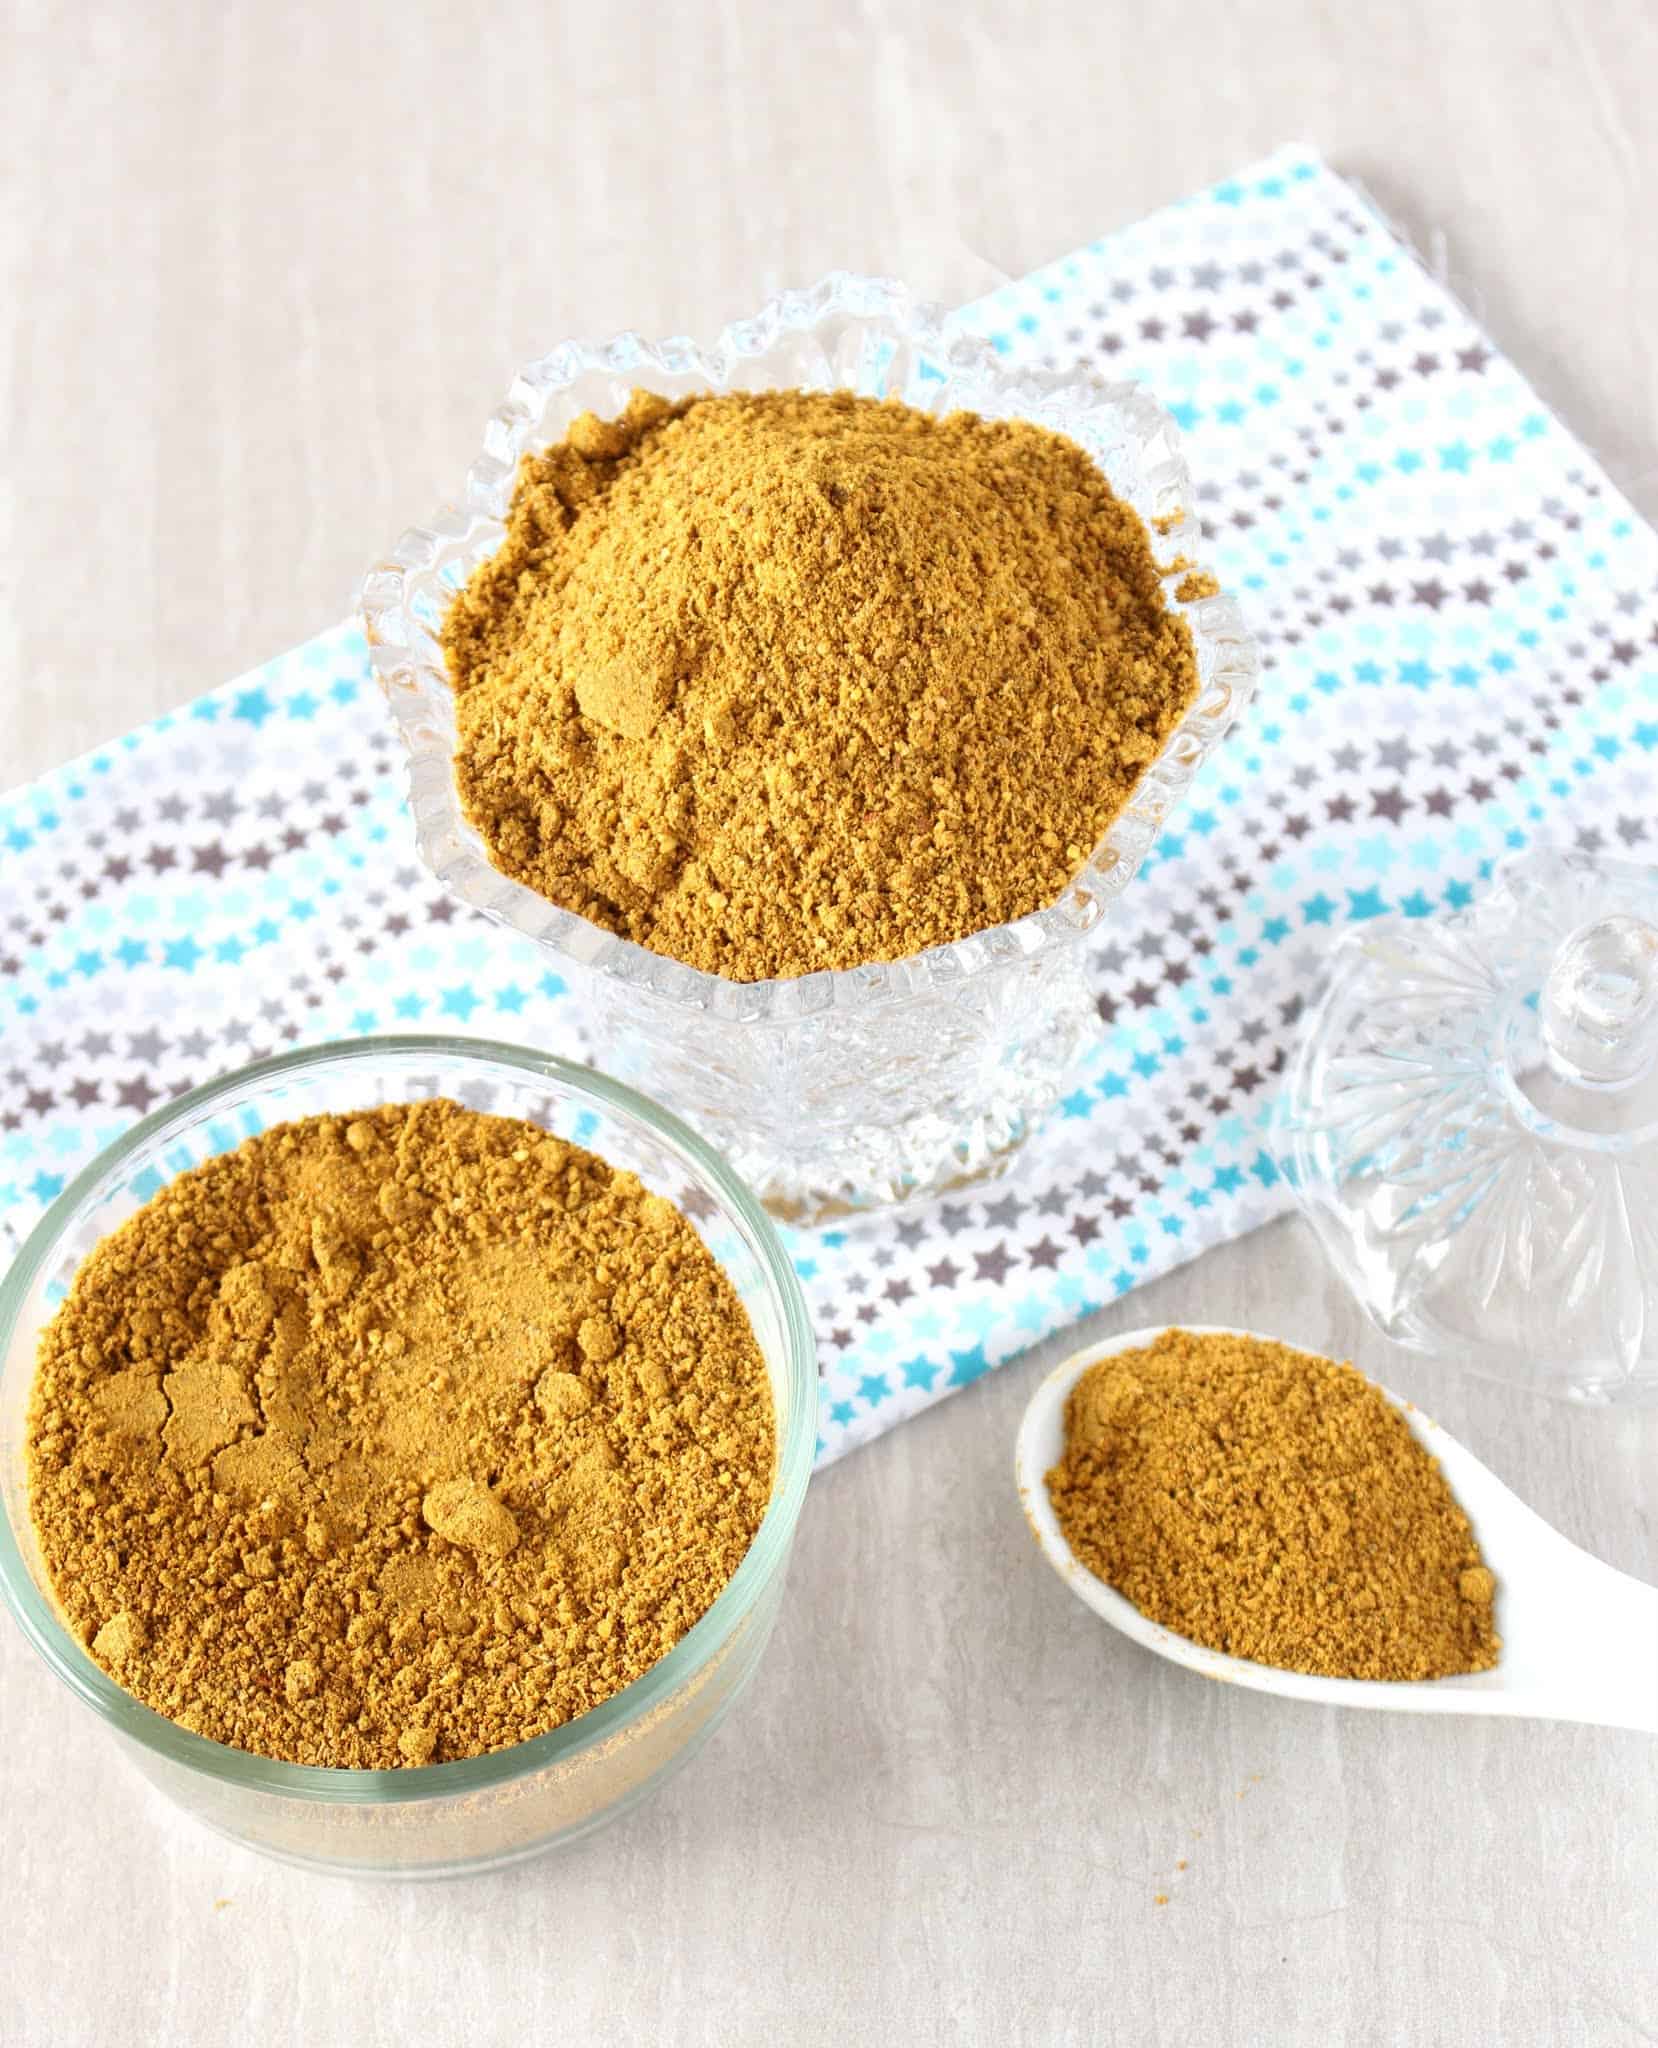 Rasam powder in containers